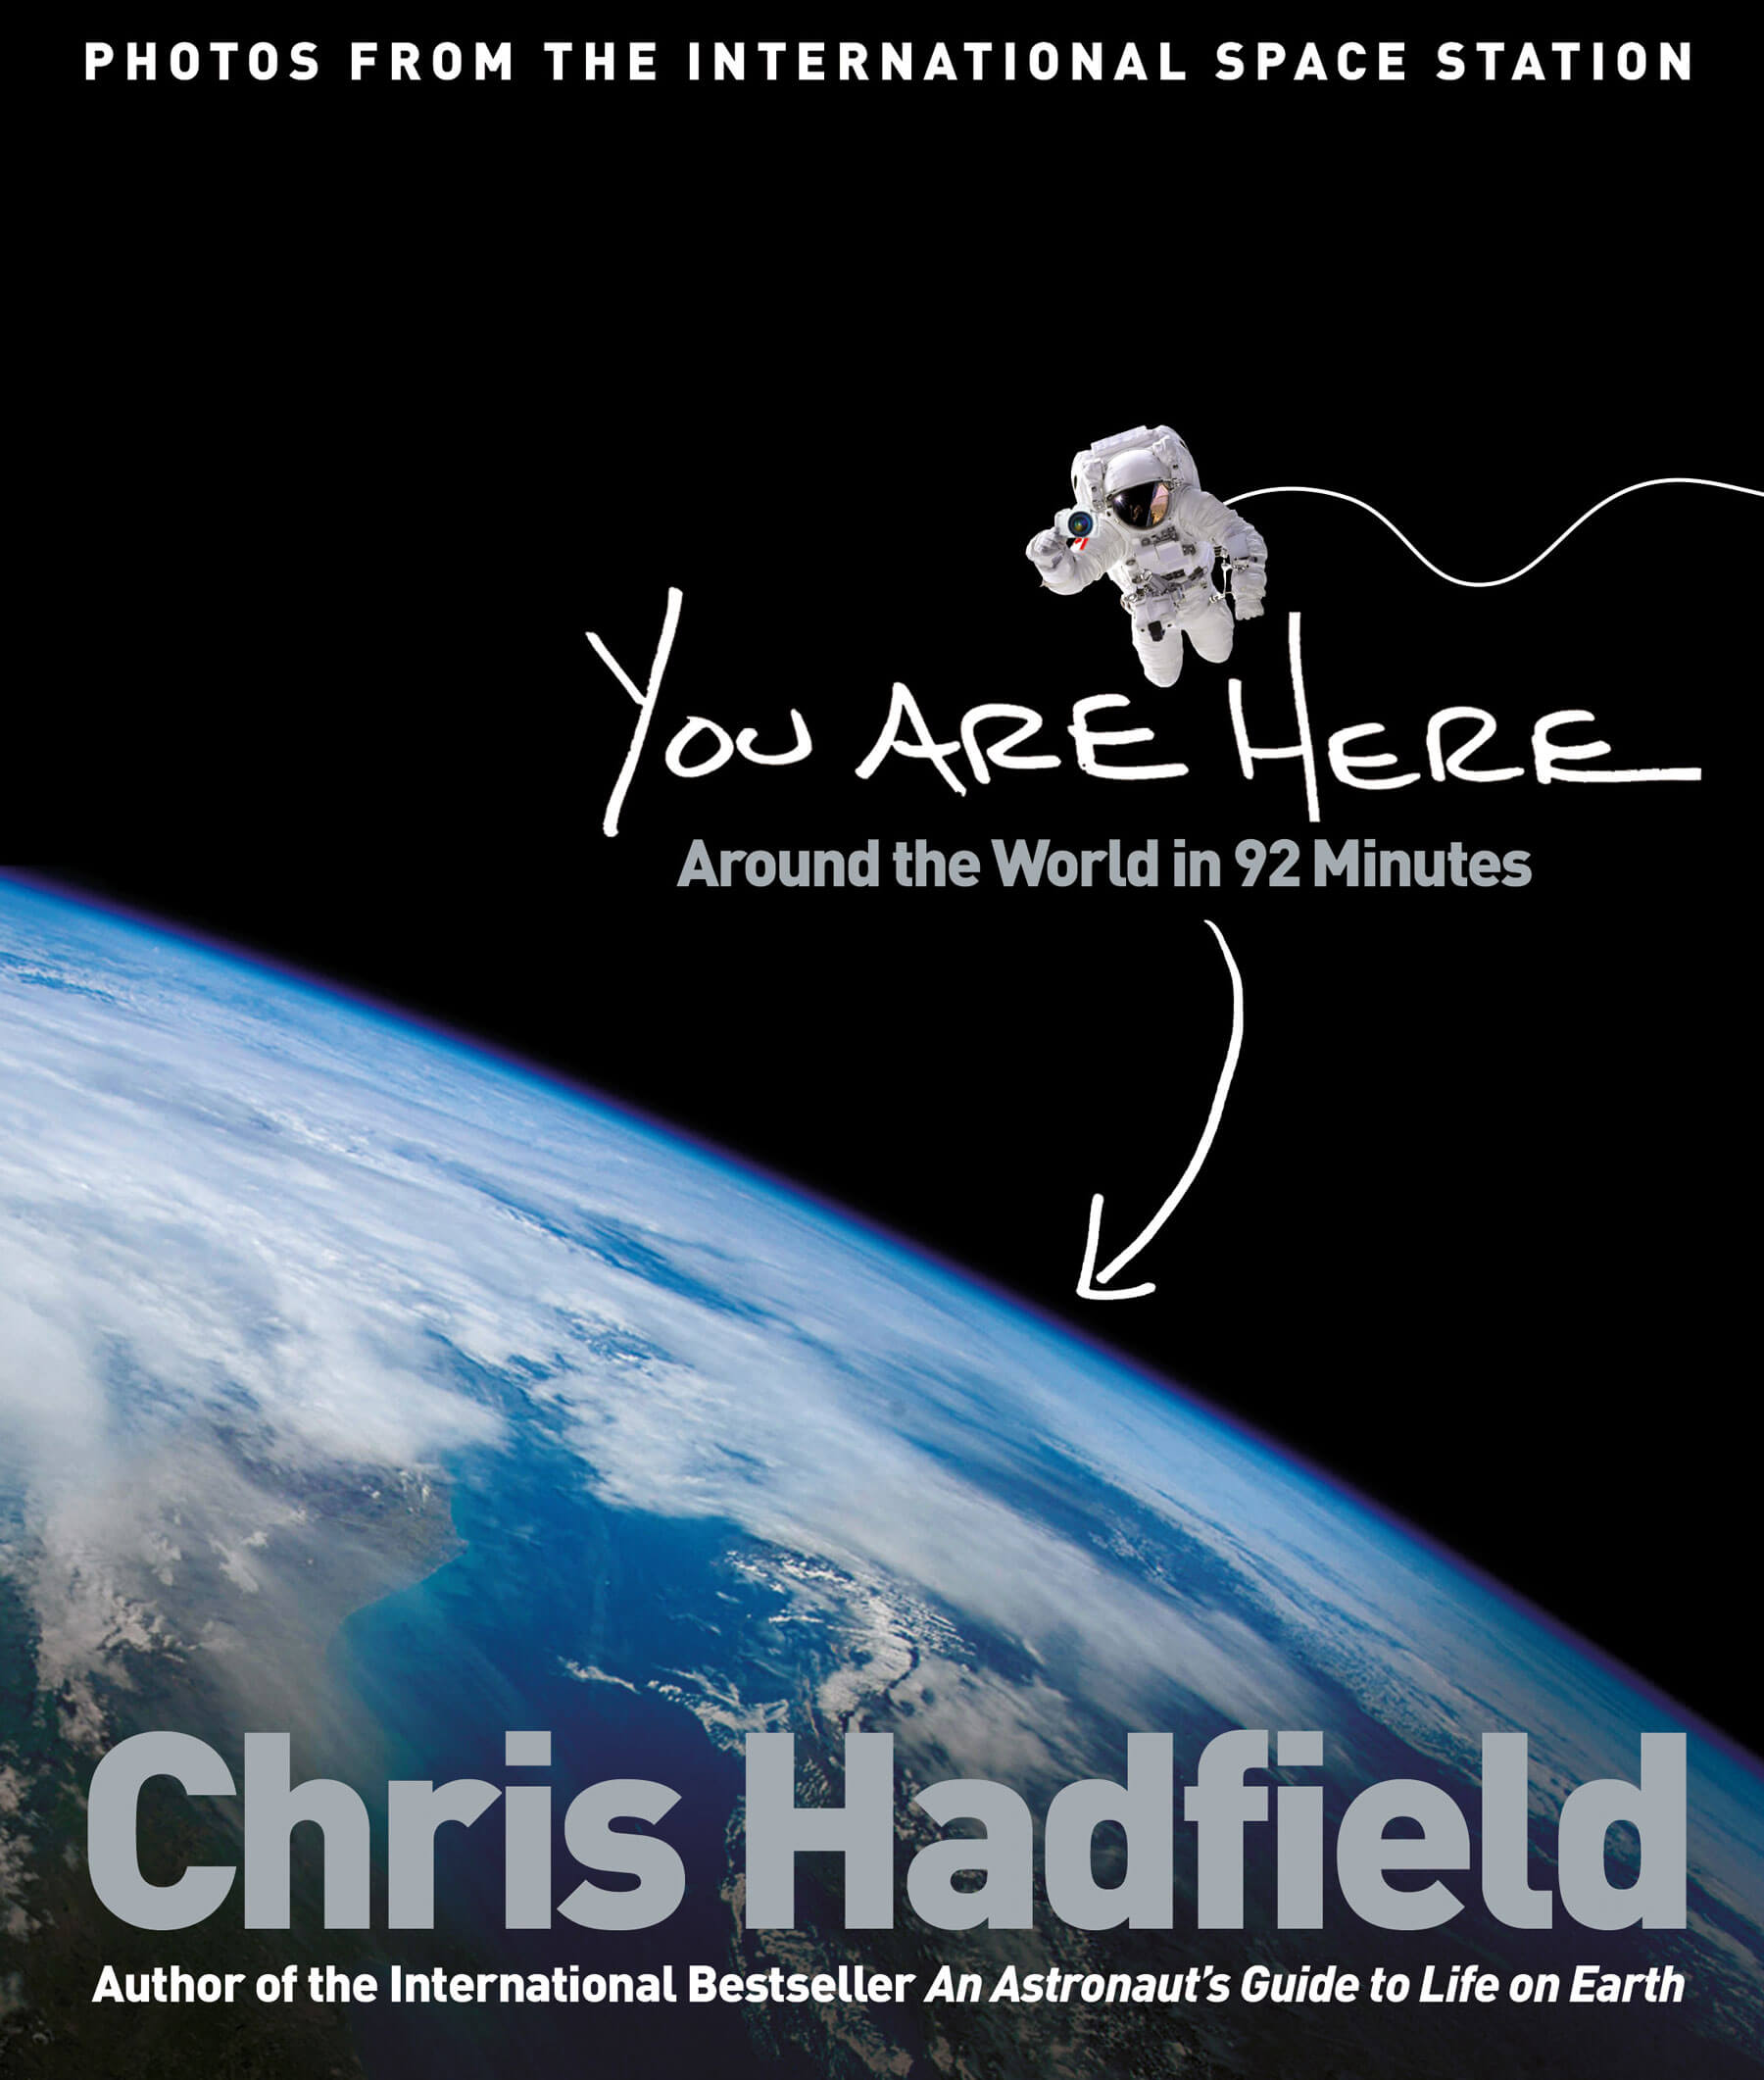 Cover art from Chris Hadfield's 'You Are Here' - UK and US Version